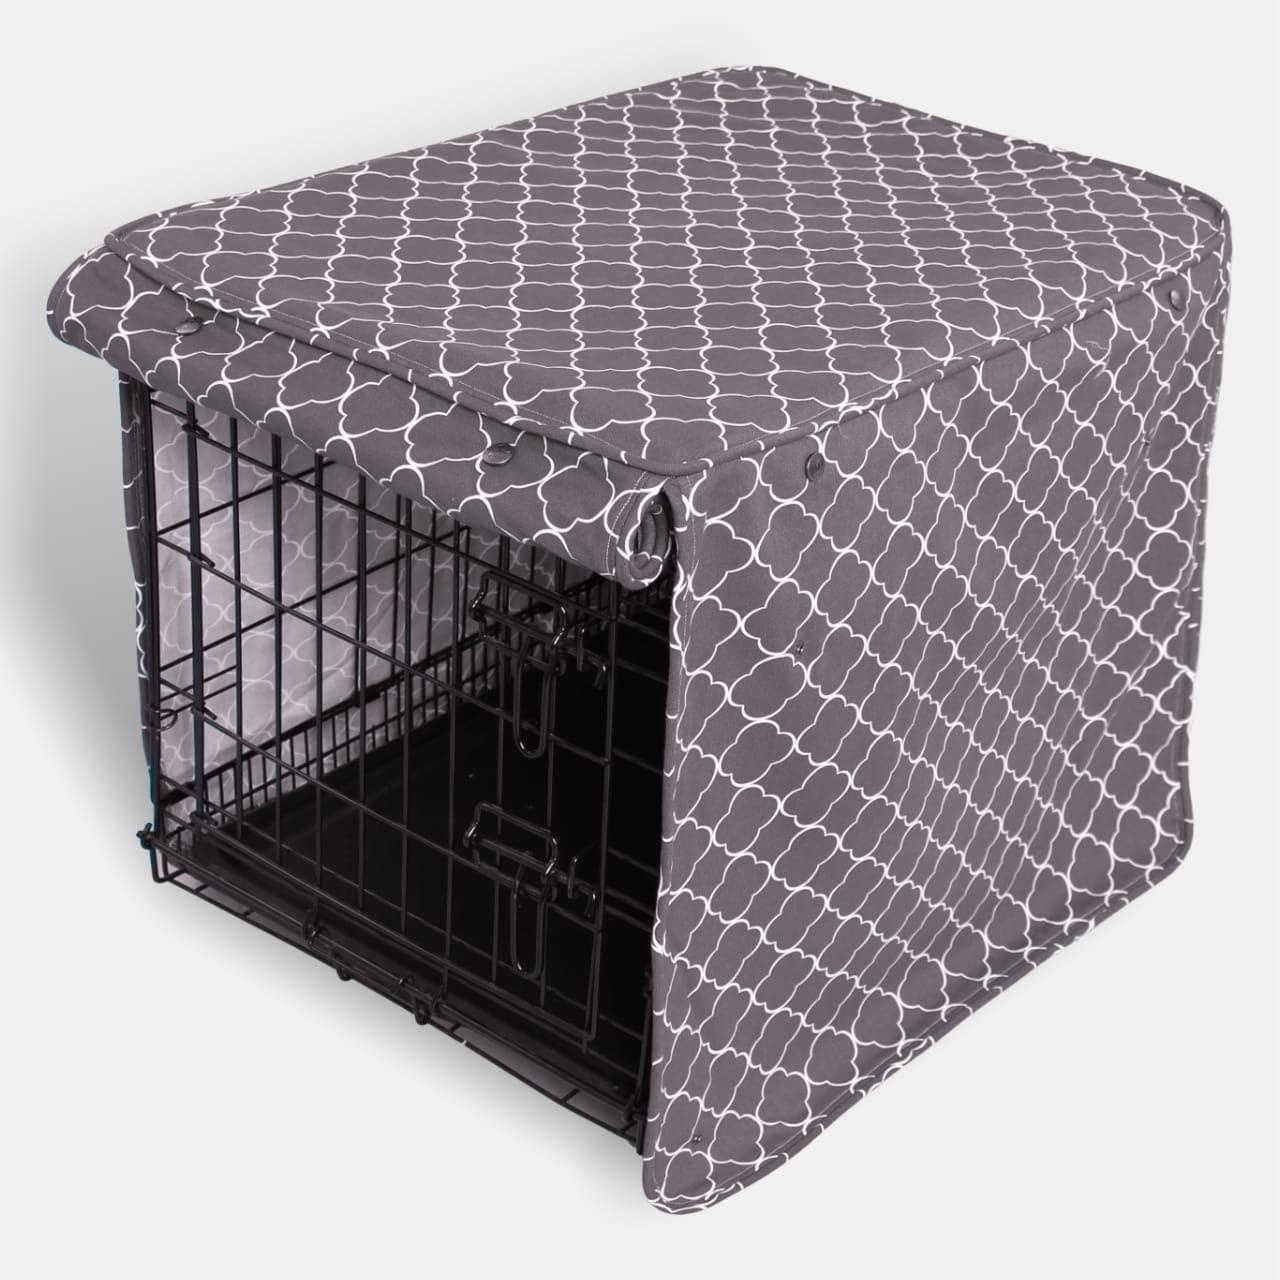 Pet Dreams Breathable Crate Cover - Double Door Dog Crate Covers/Kennel  Covers, Metal Dog Crate Accessories, Machine Washable Kennel Cover (Khaki  Tan